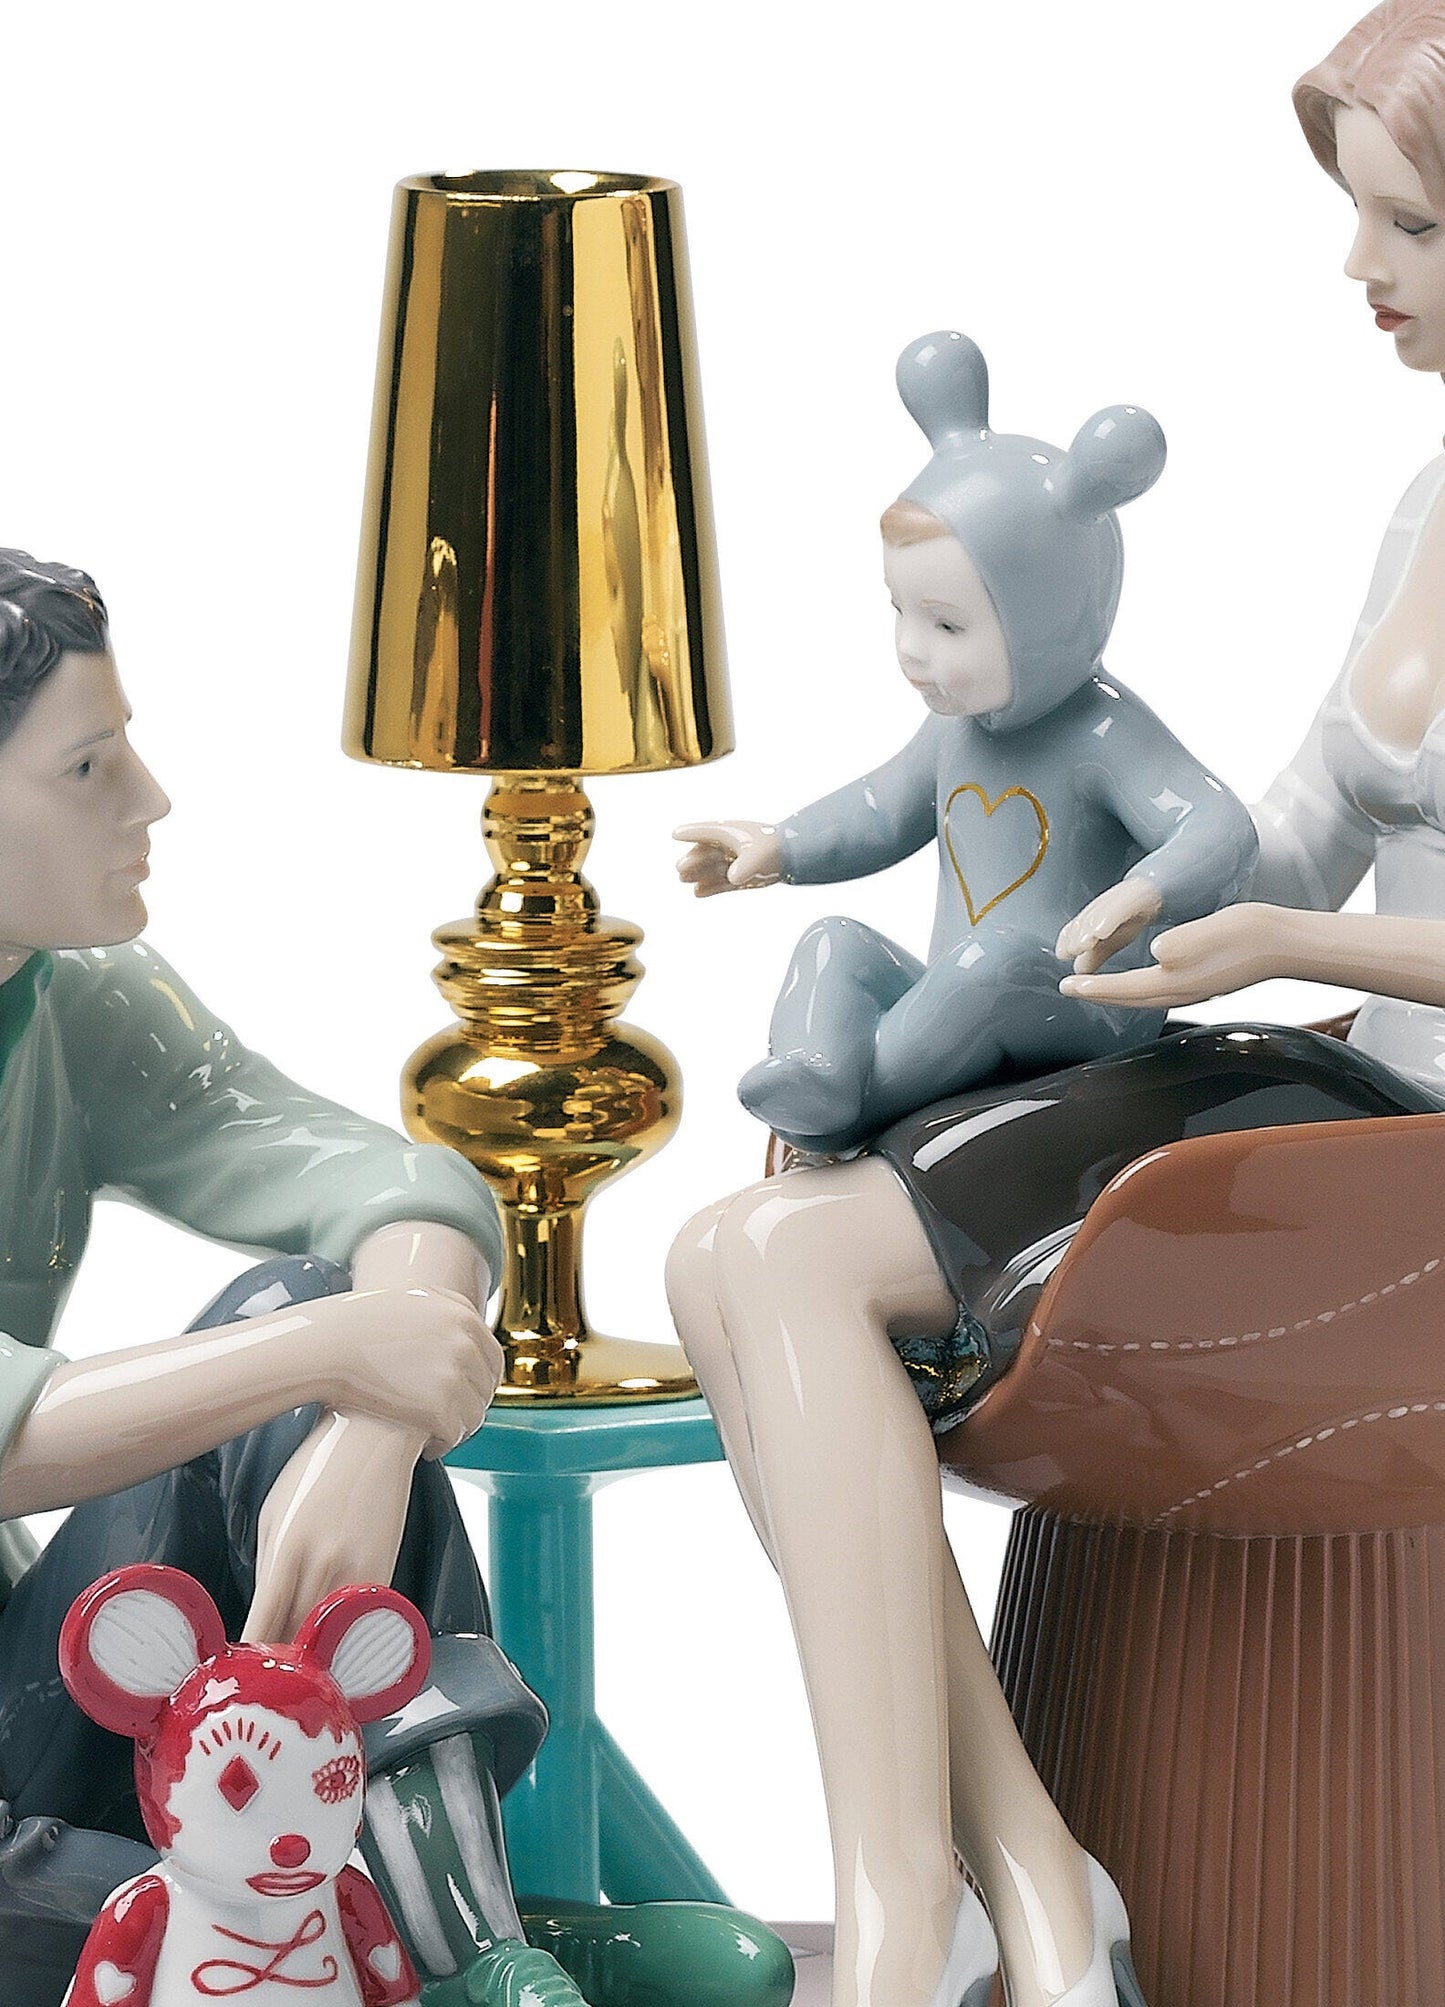 The Family Portrait Figurine By Jaime Hayon